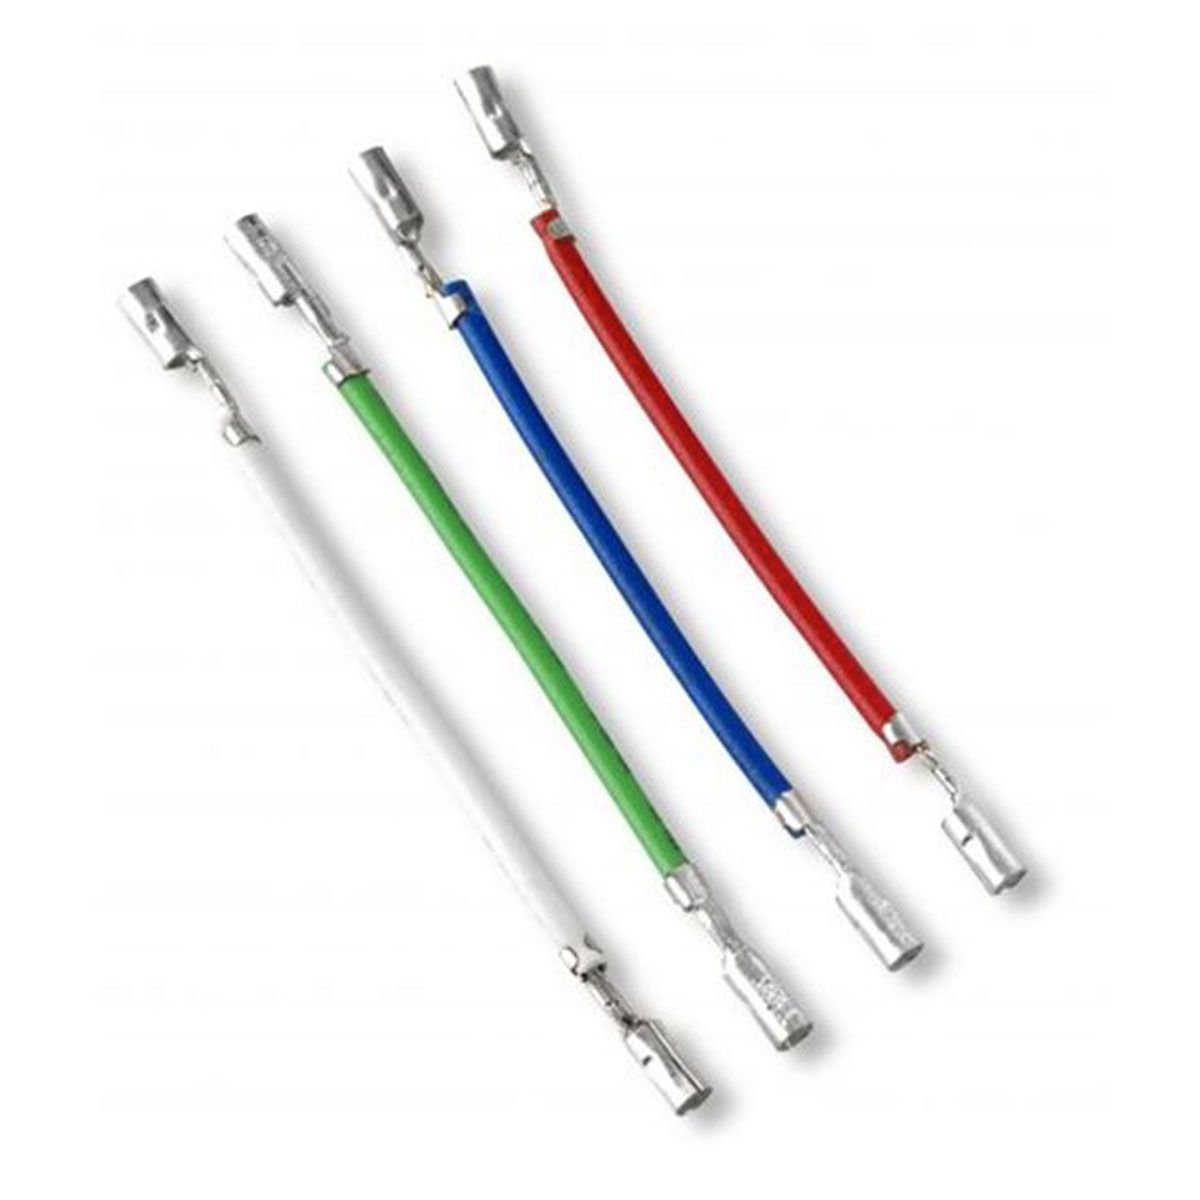 Ortofon Lead Wires/Headshell Cables - 4 Pack